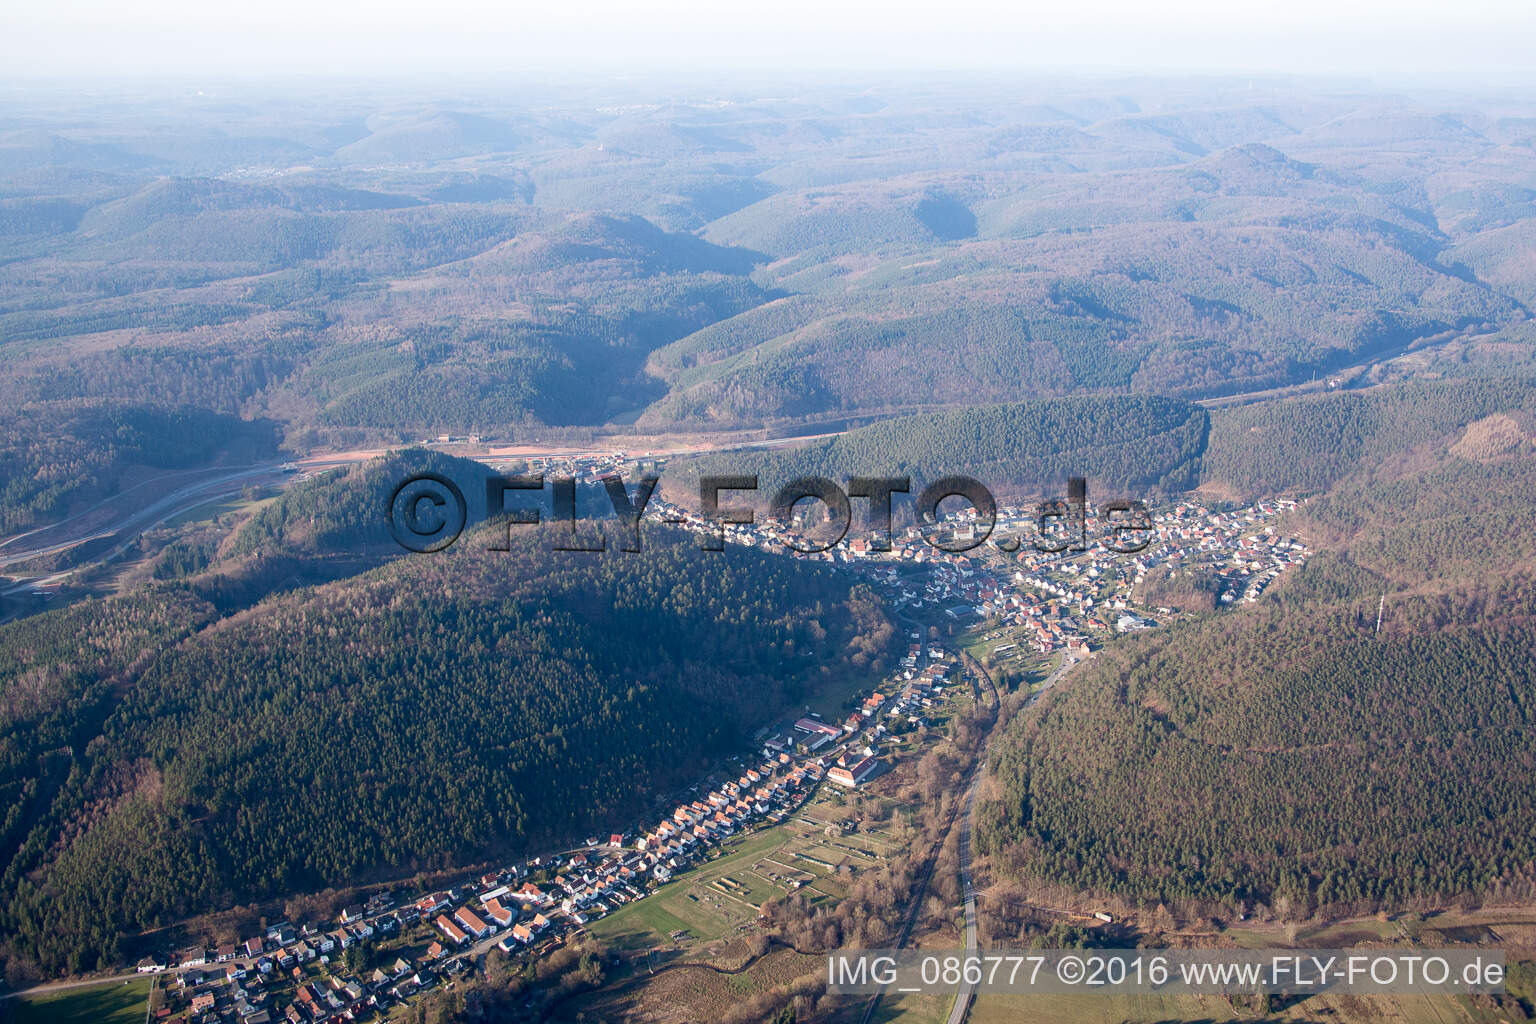 Hinterweidenthal in the state Rhineland-Palatinate, Germany seen from above